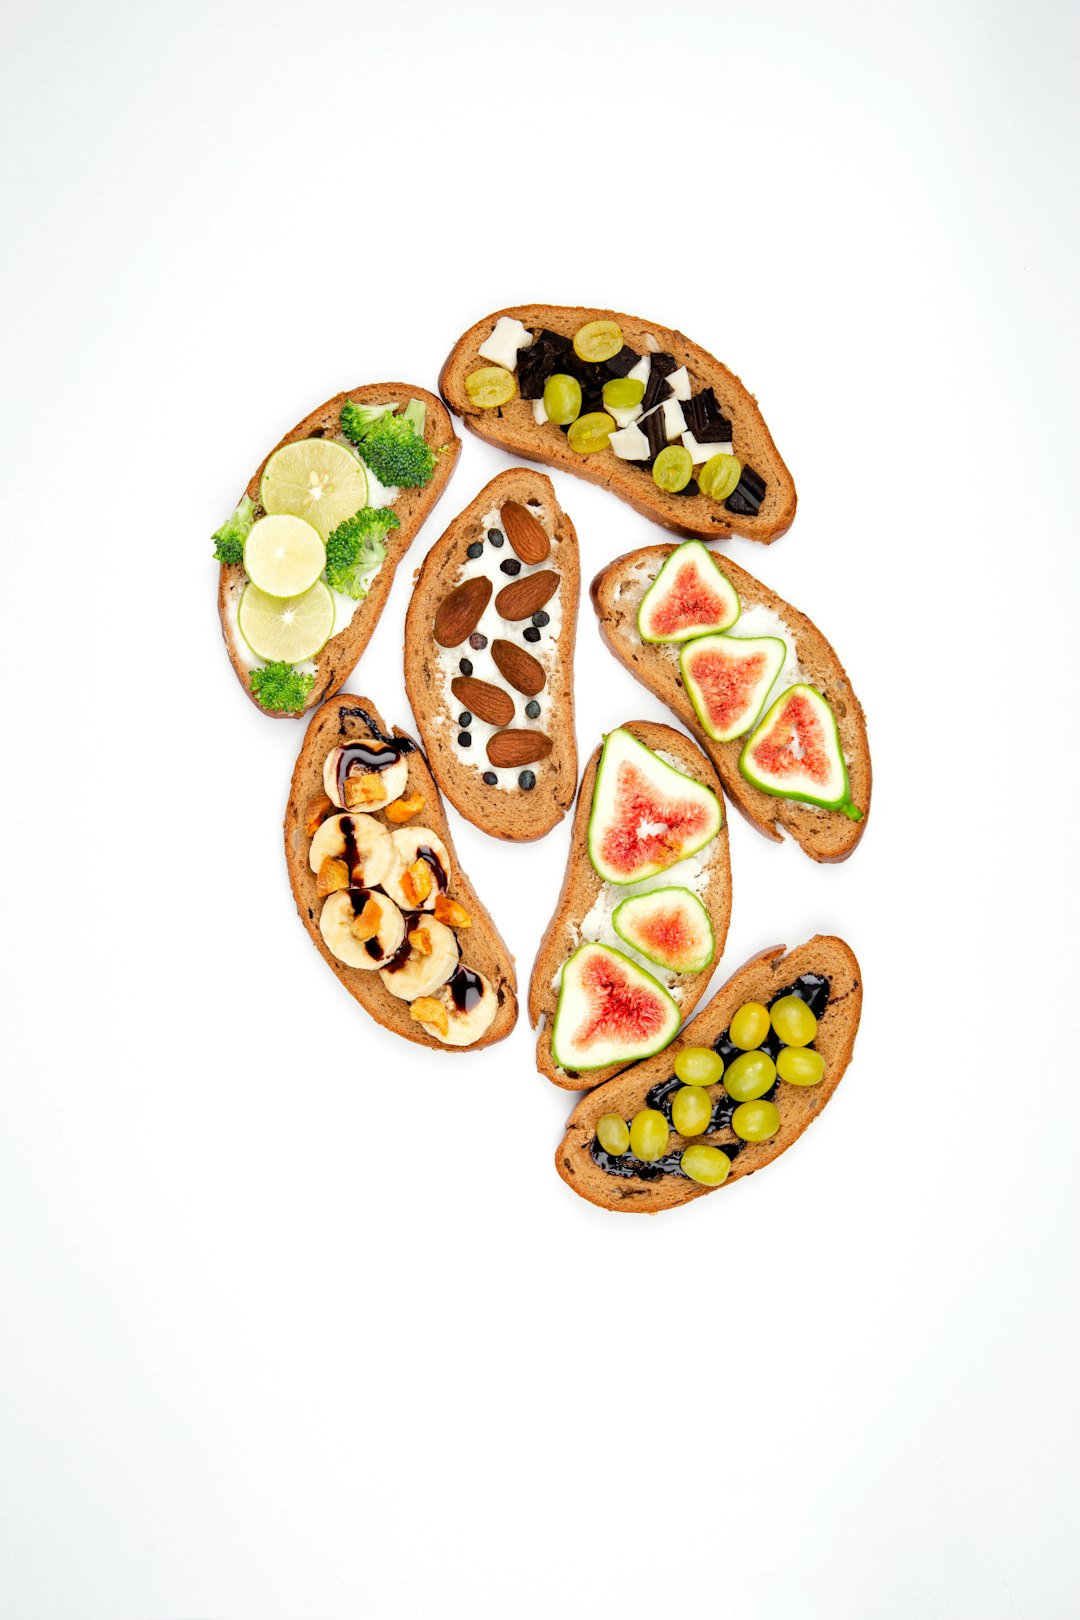 brown bread with green and brown toppings